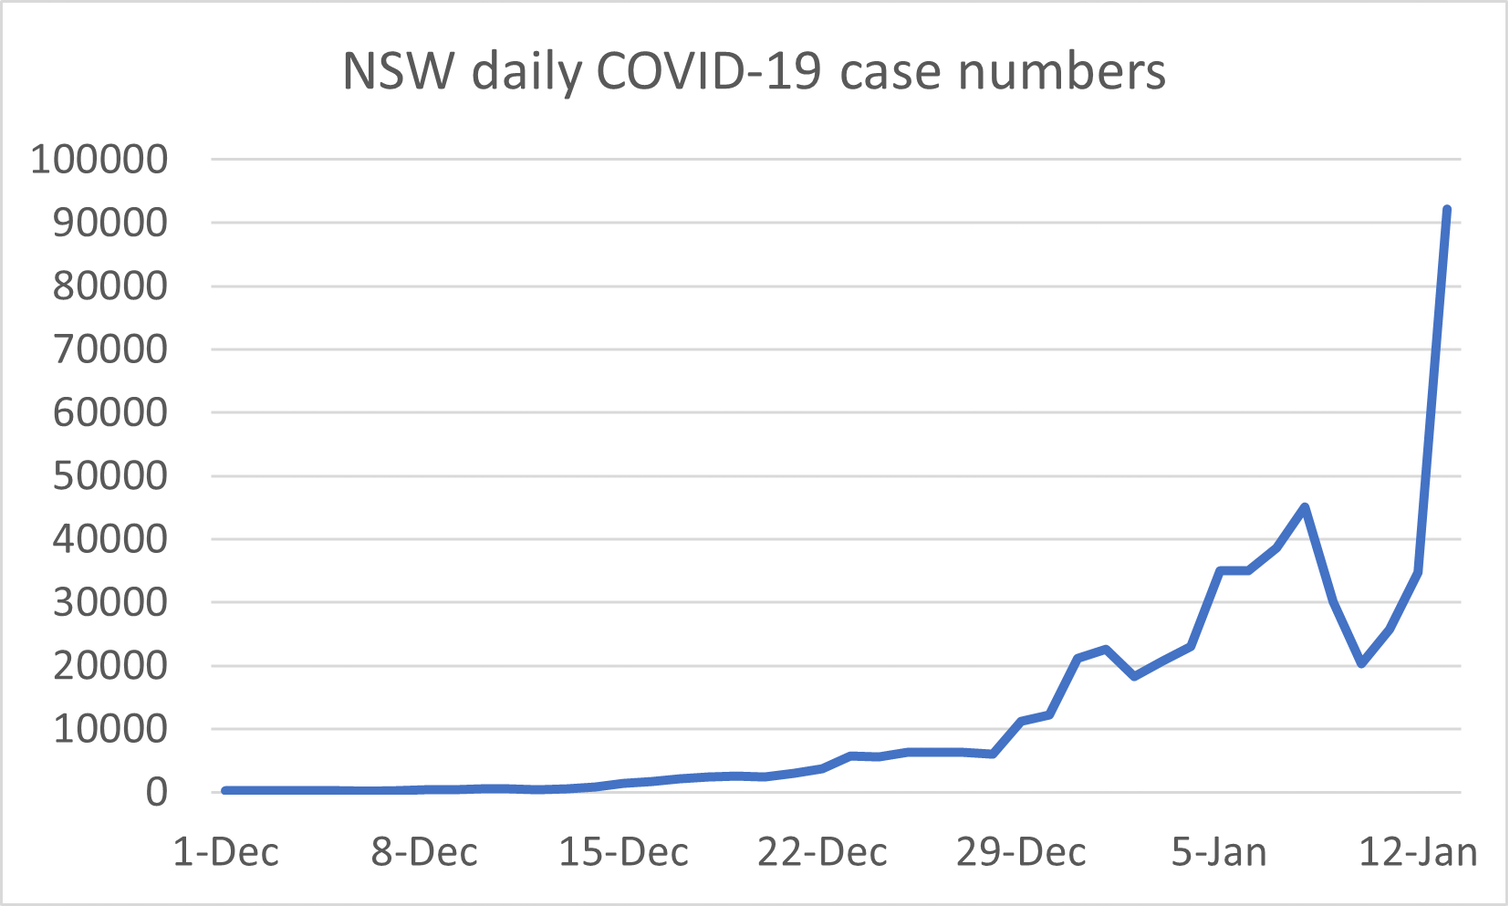 A line graph showing the epidemic curve for cases of COVID-19 in NSW